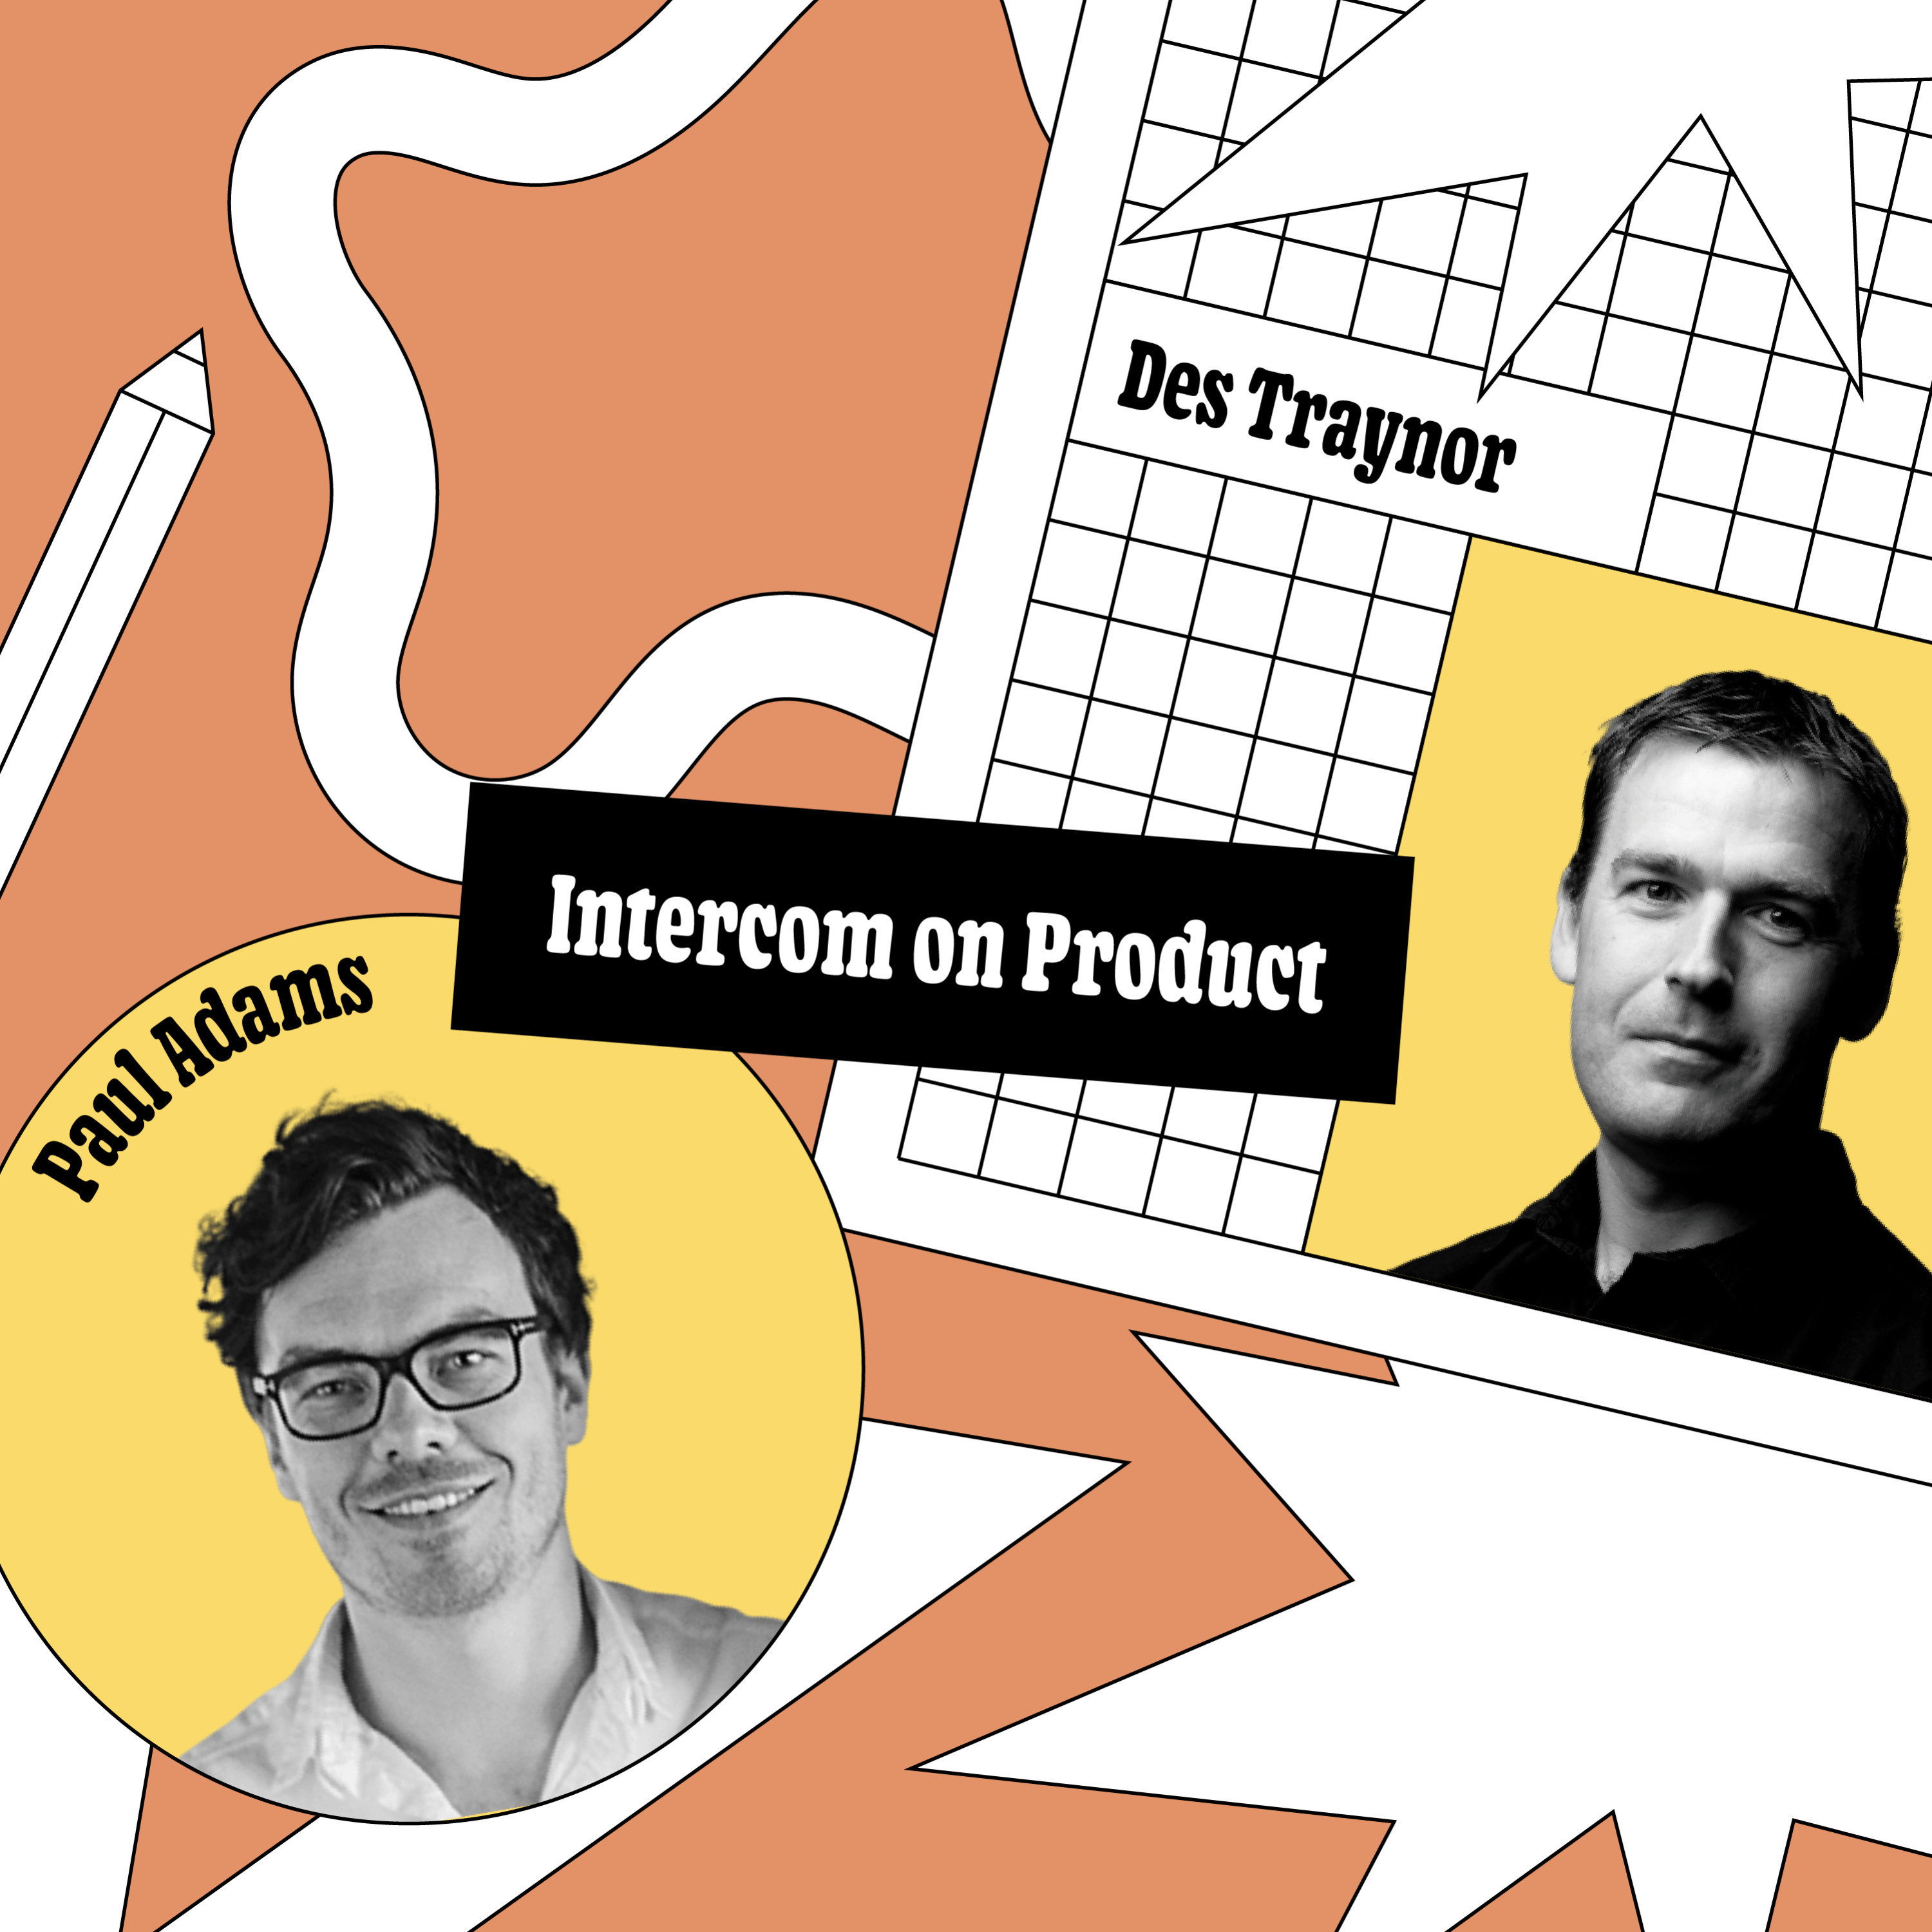 Intercom on Product: Accelerating your strategy after COVID-19